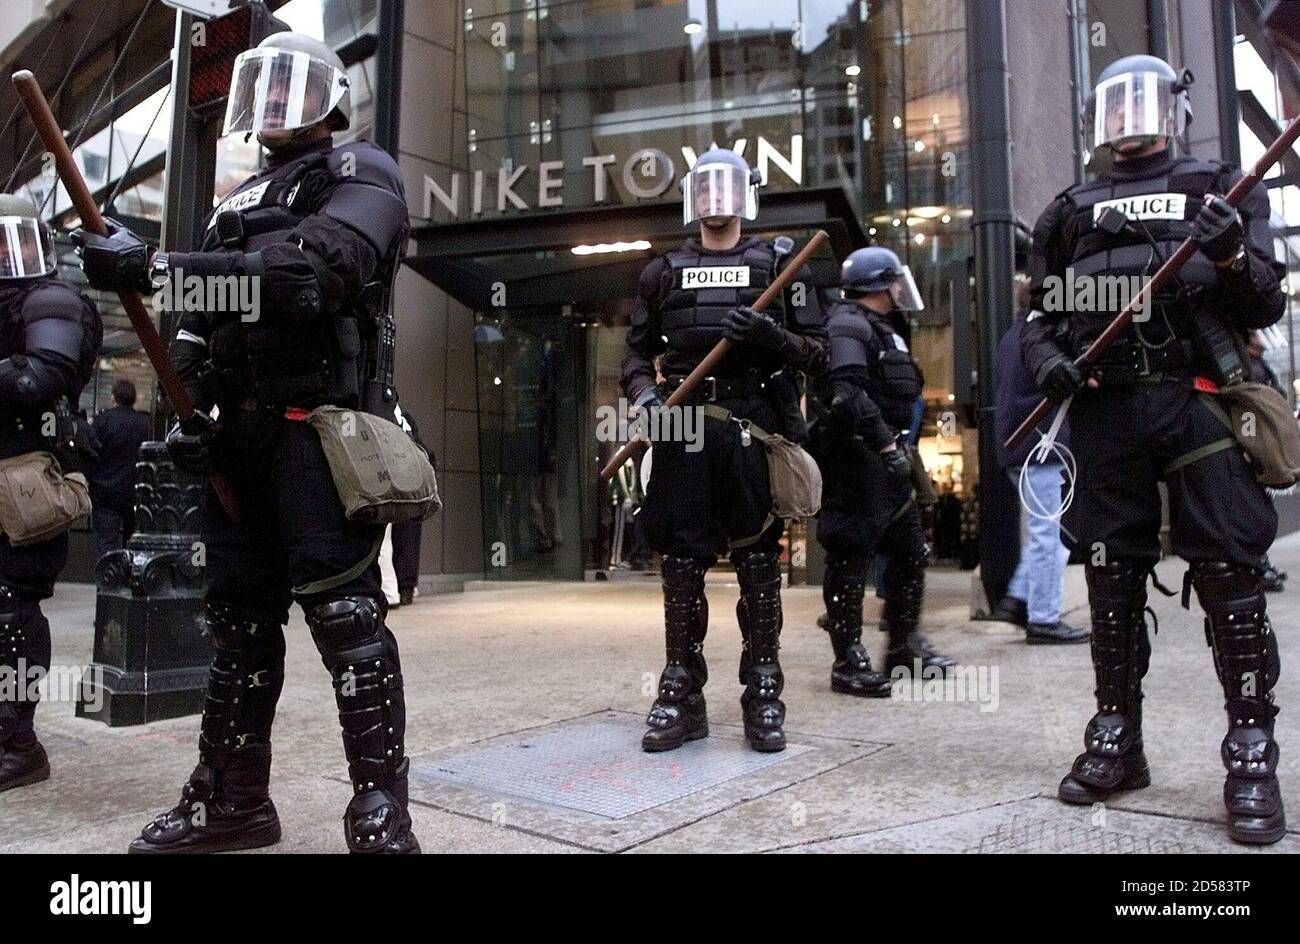 Seattle riot police guard the front of a Nike store in downtown Seattle  after several thousand protesters chanted on the street November 29.  Protesters who vowed to shut down global trade talks